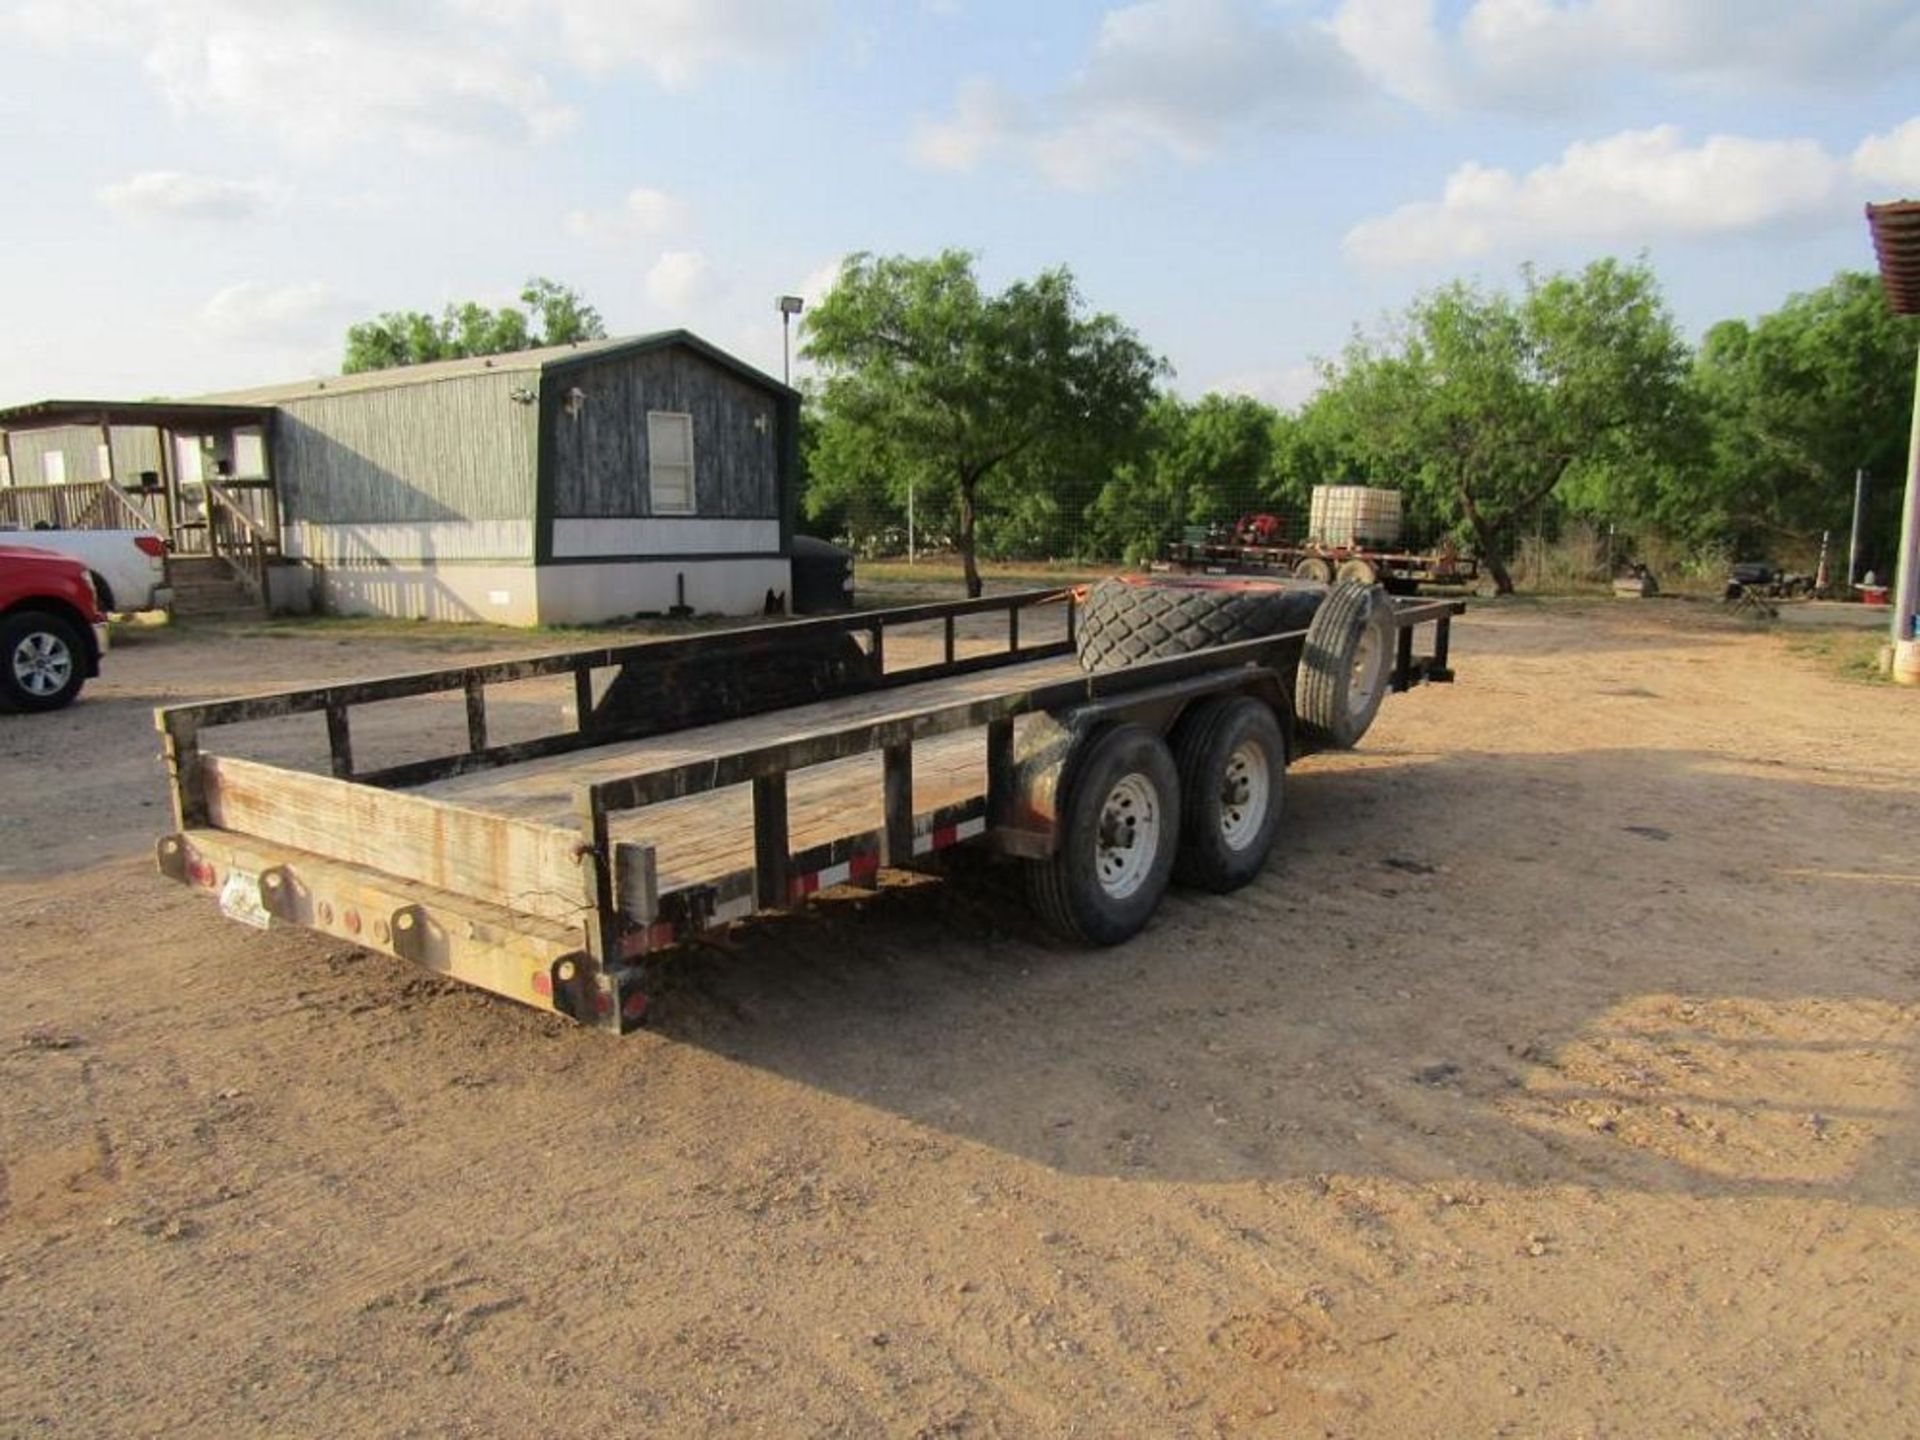 Big Tex Tadem Axle Trailer, 14IP, 20 ft. x 7 ft. Bed, VIN 18VPX2026E2054712, #50965 - Image 2 of 3